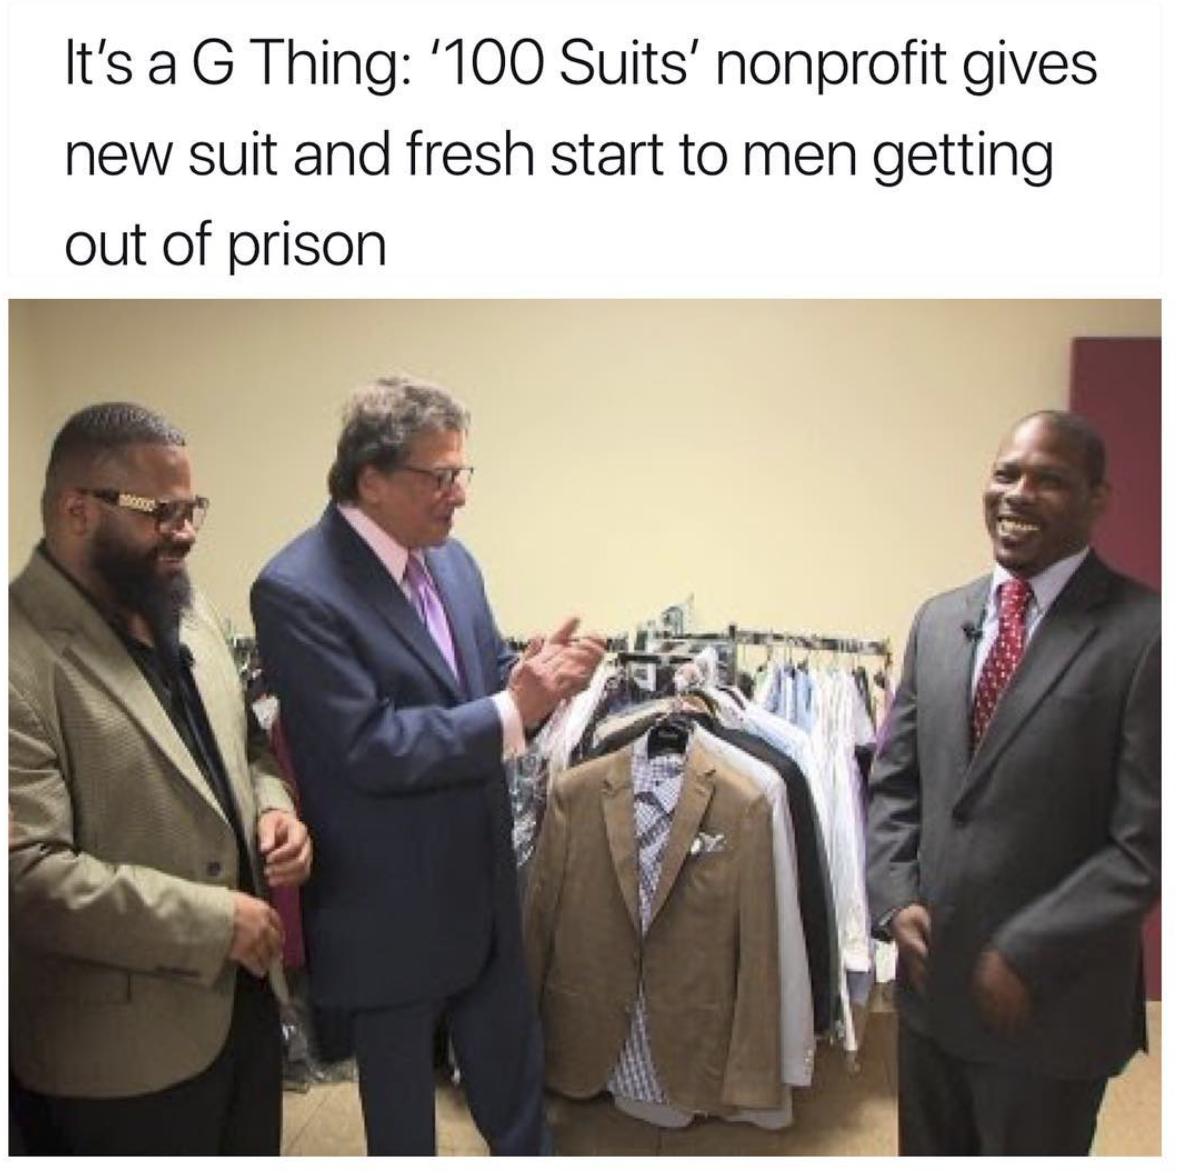 presentation - It's a G Thing '100 Suits' nonprofit gives new suit and fresh start to men getting out of prison